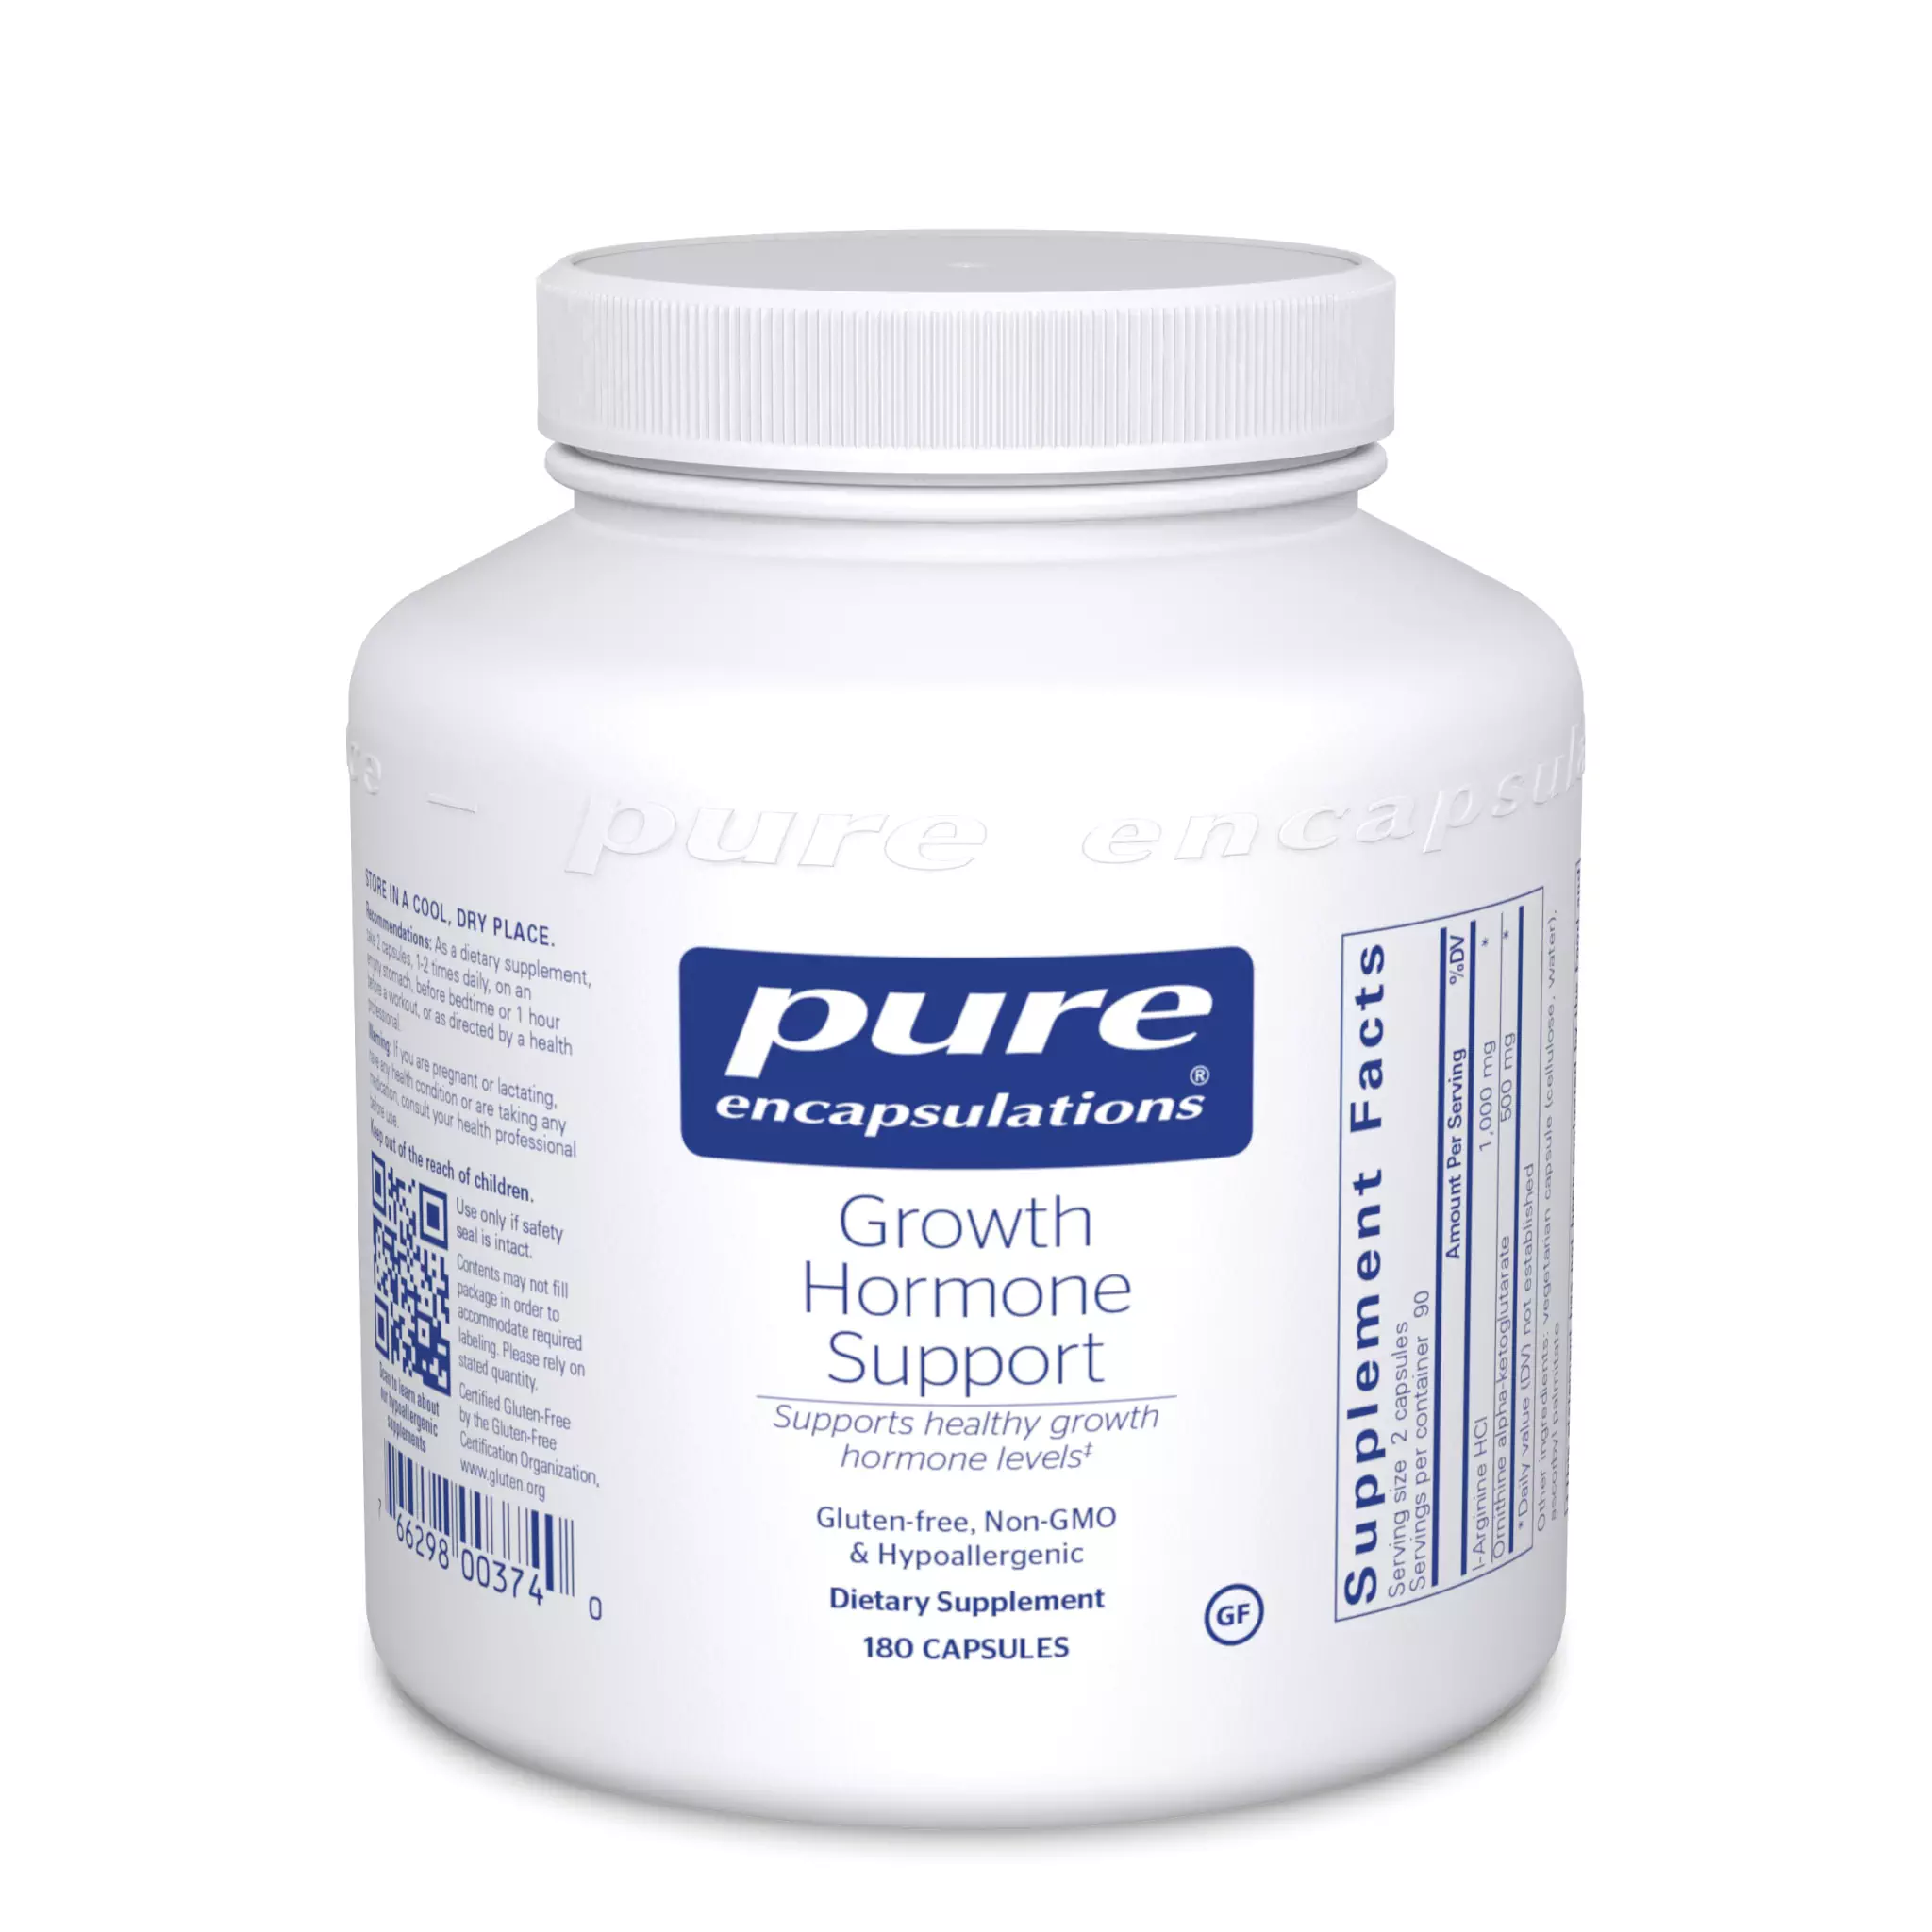 Pure Encapsulations - Growth Hormone Support